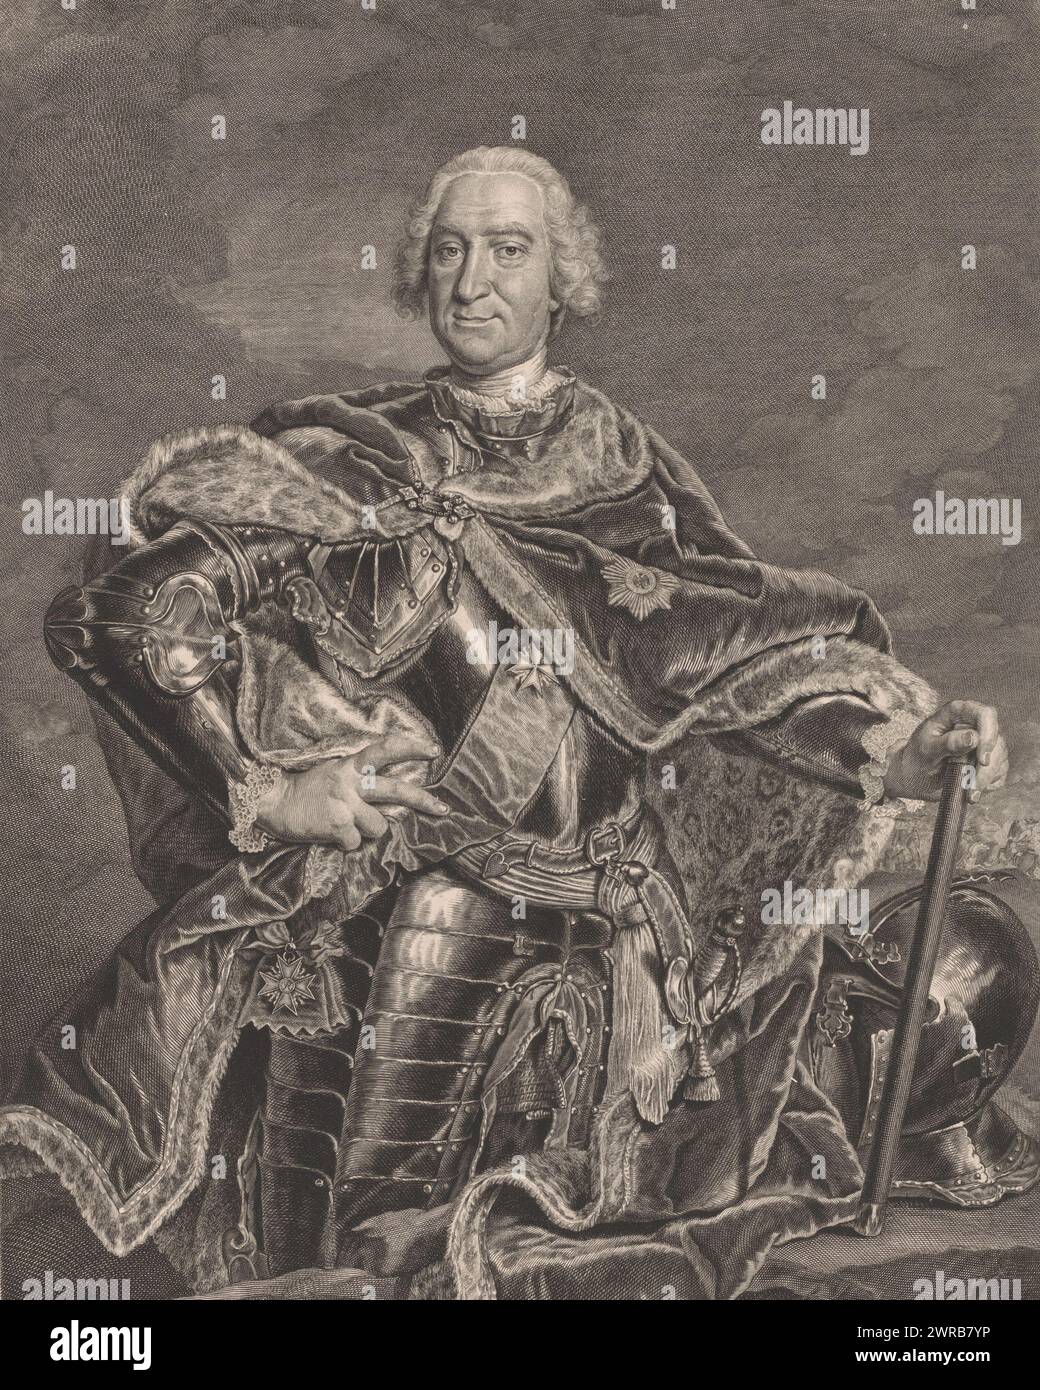 Portrait of an unknown Prussian general, print maker: Georg Friedrich Schmidt, 1722 - 1775, paper, engraving, etching, height 498 mm × width 359 mm, print Stock Photo